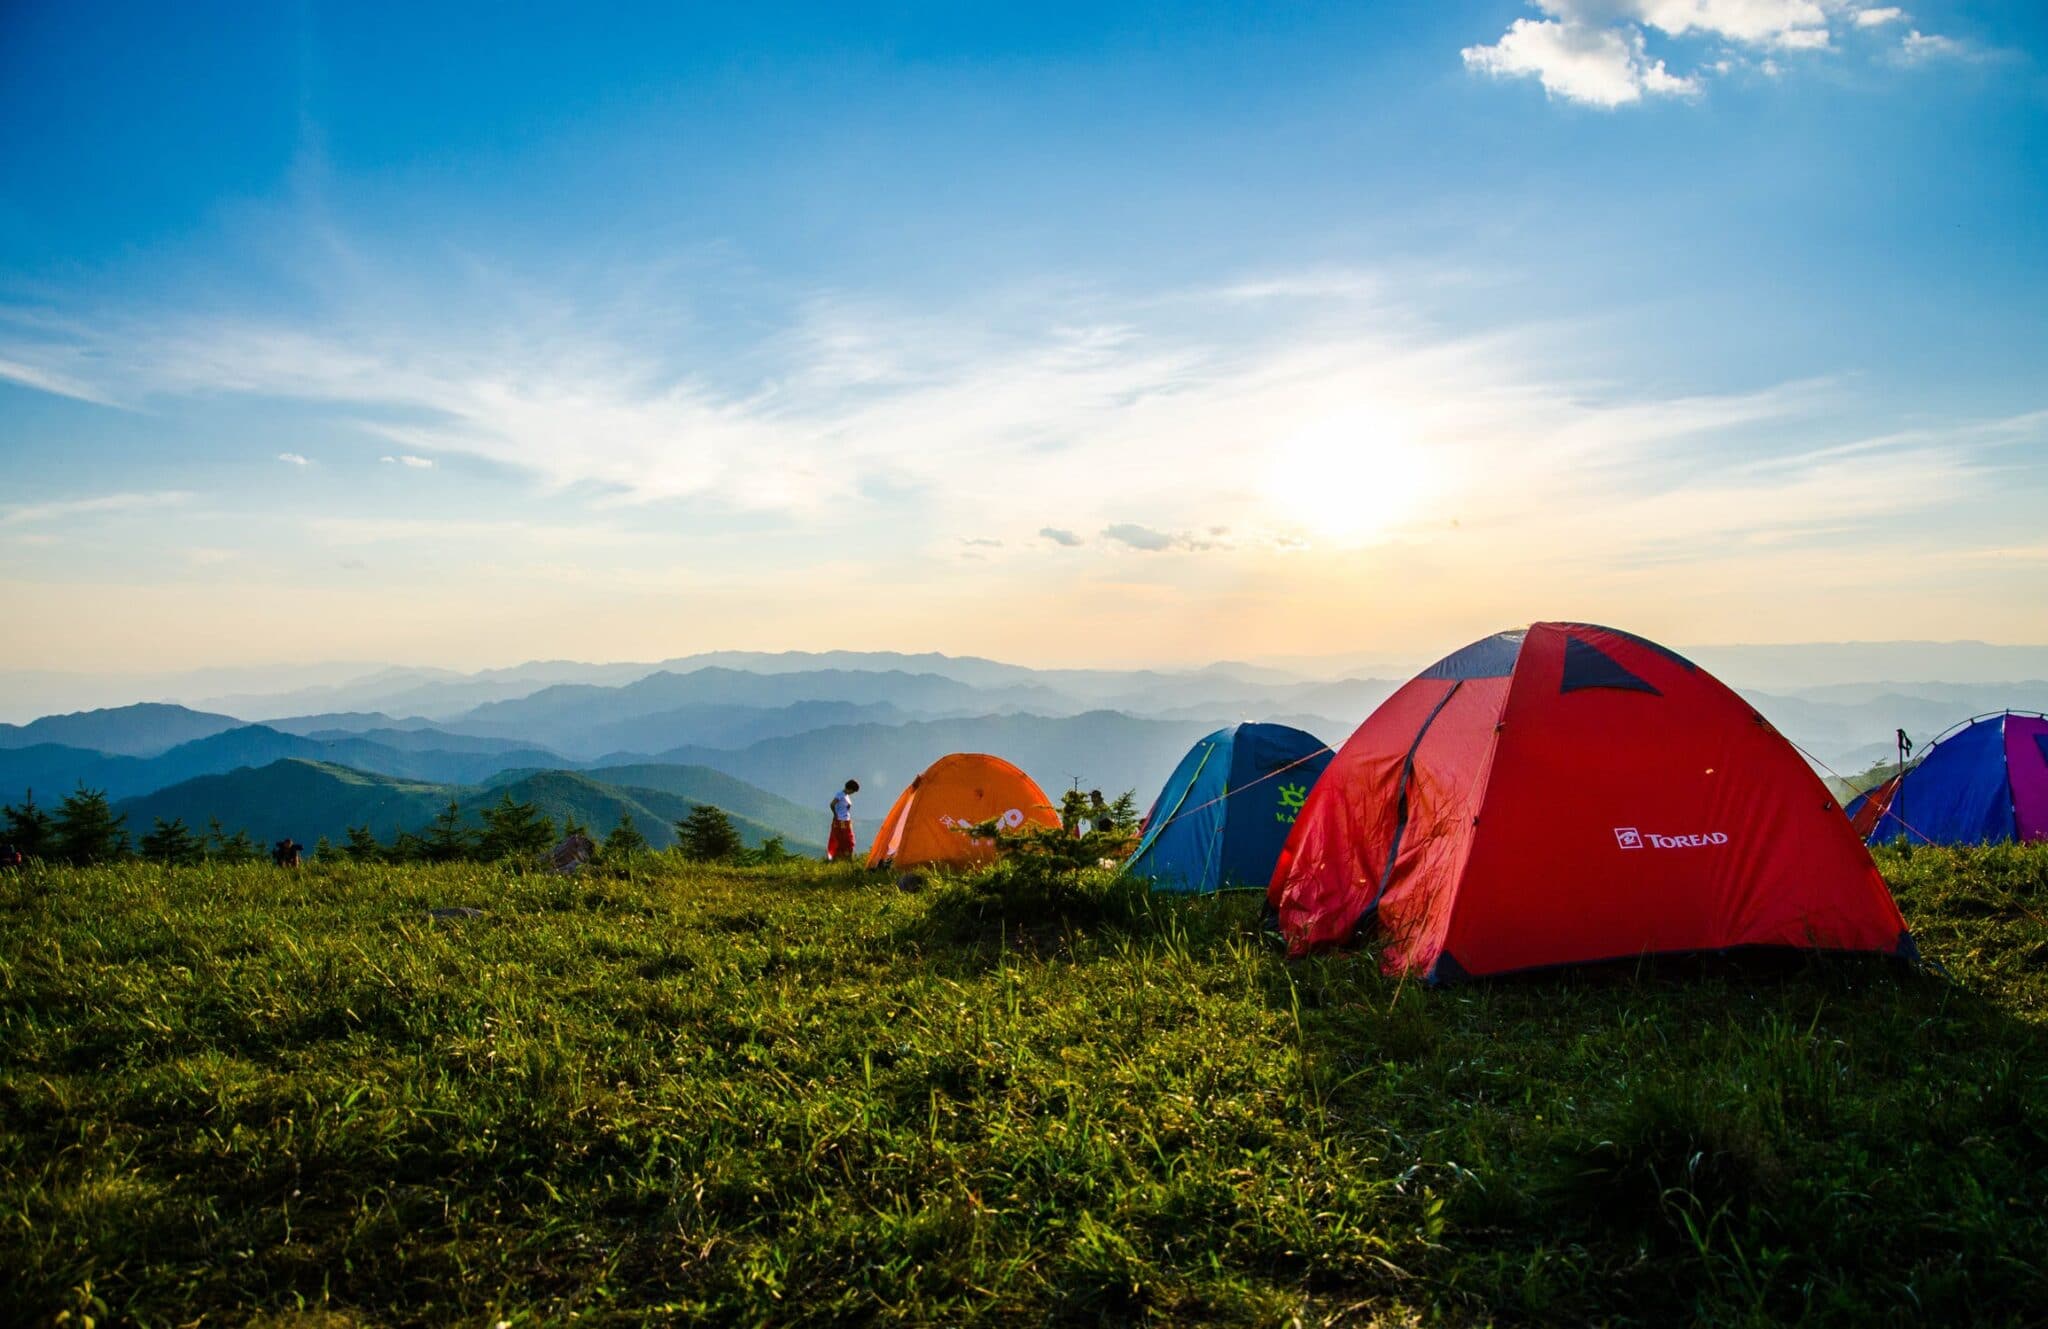 Tent camping in the United States